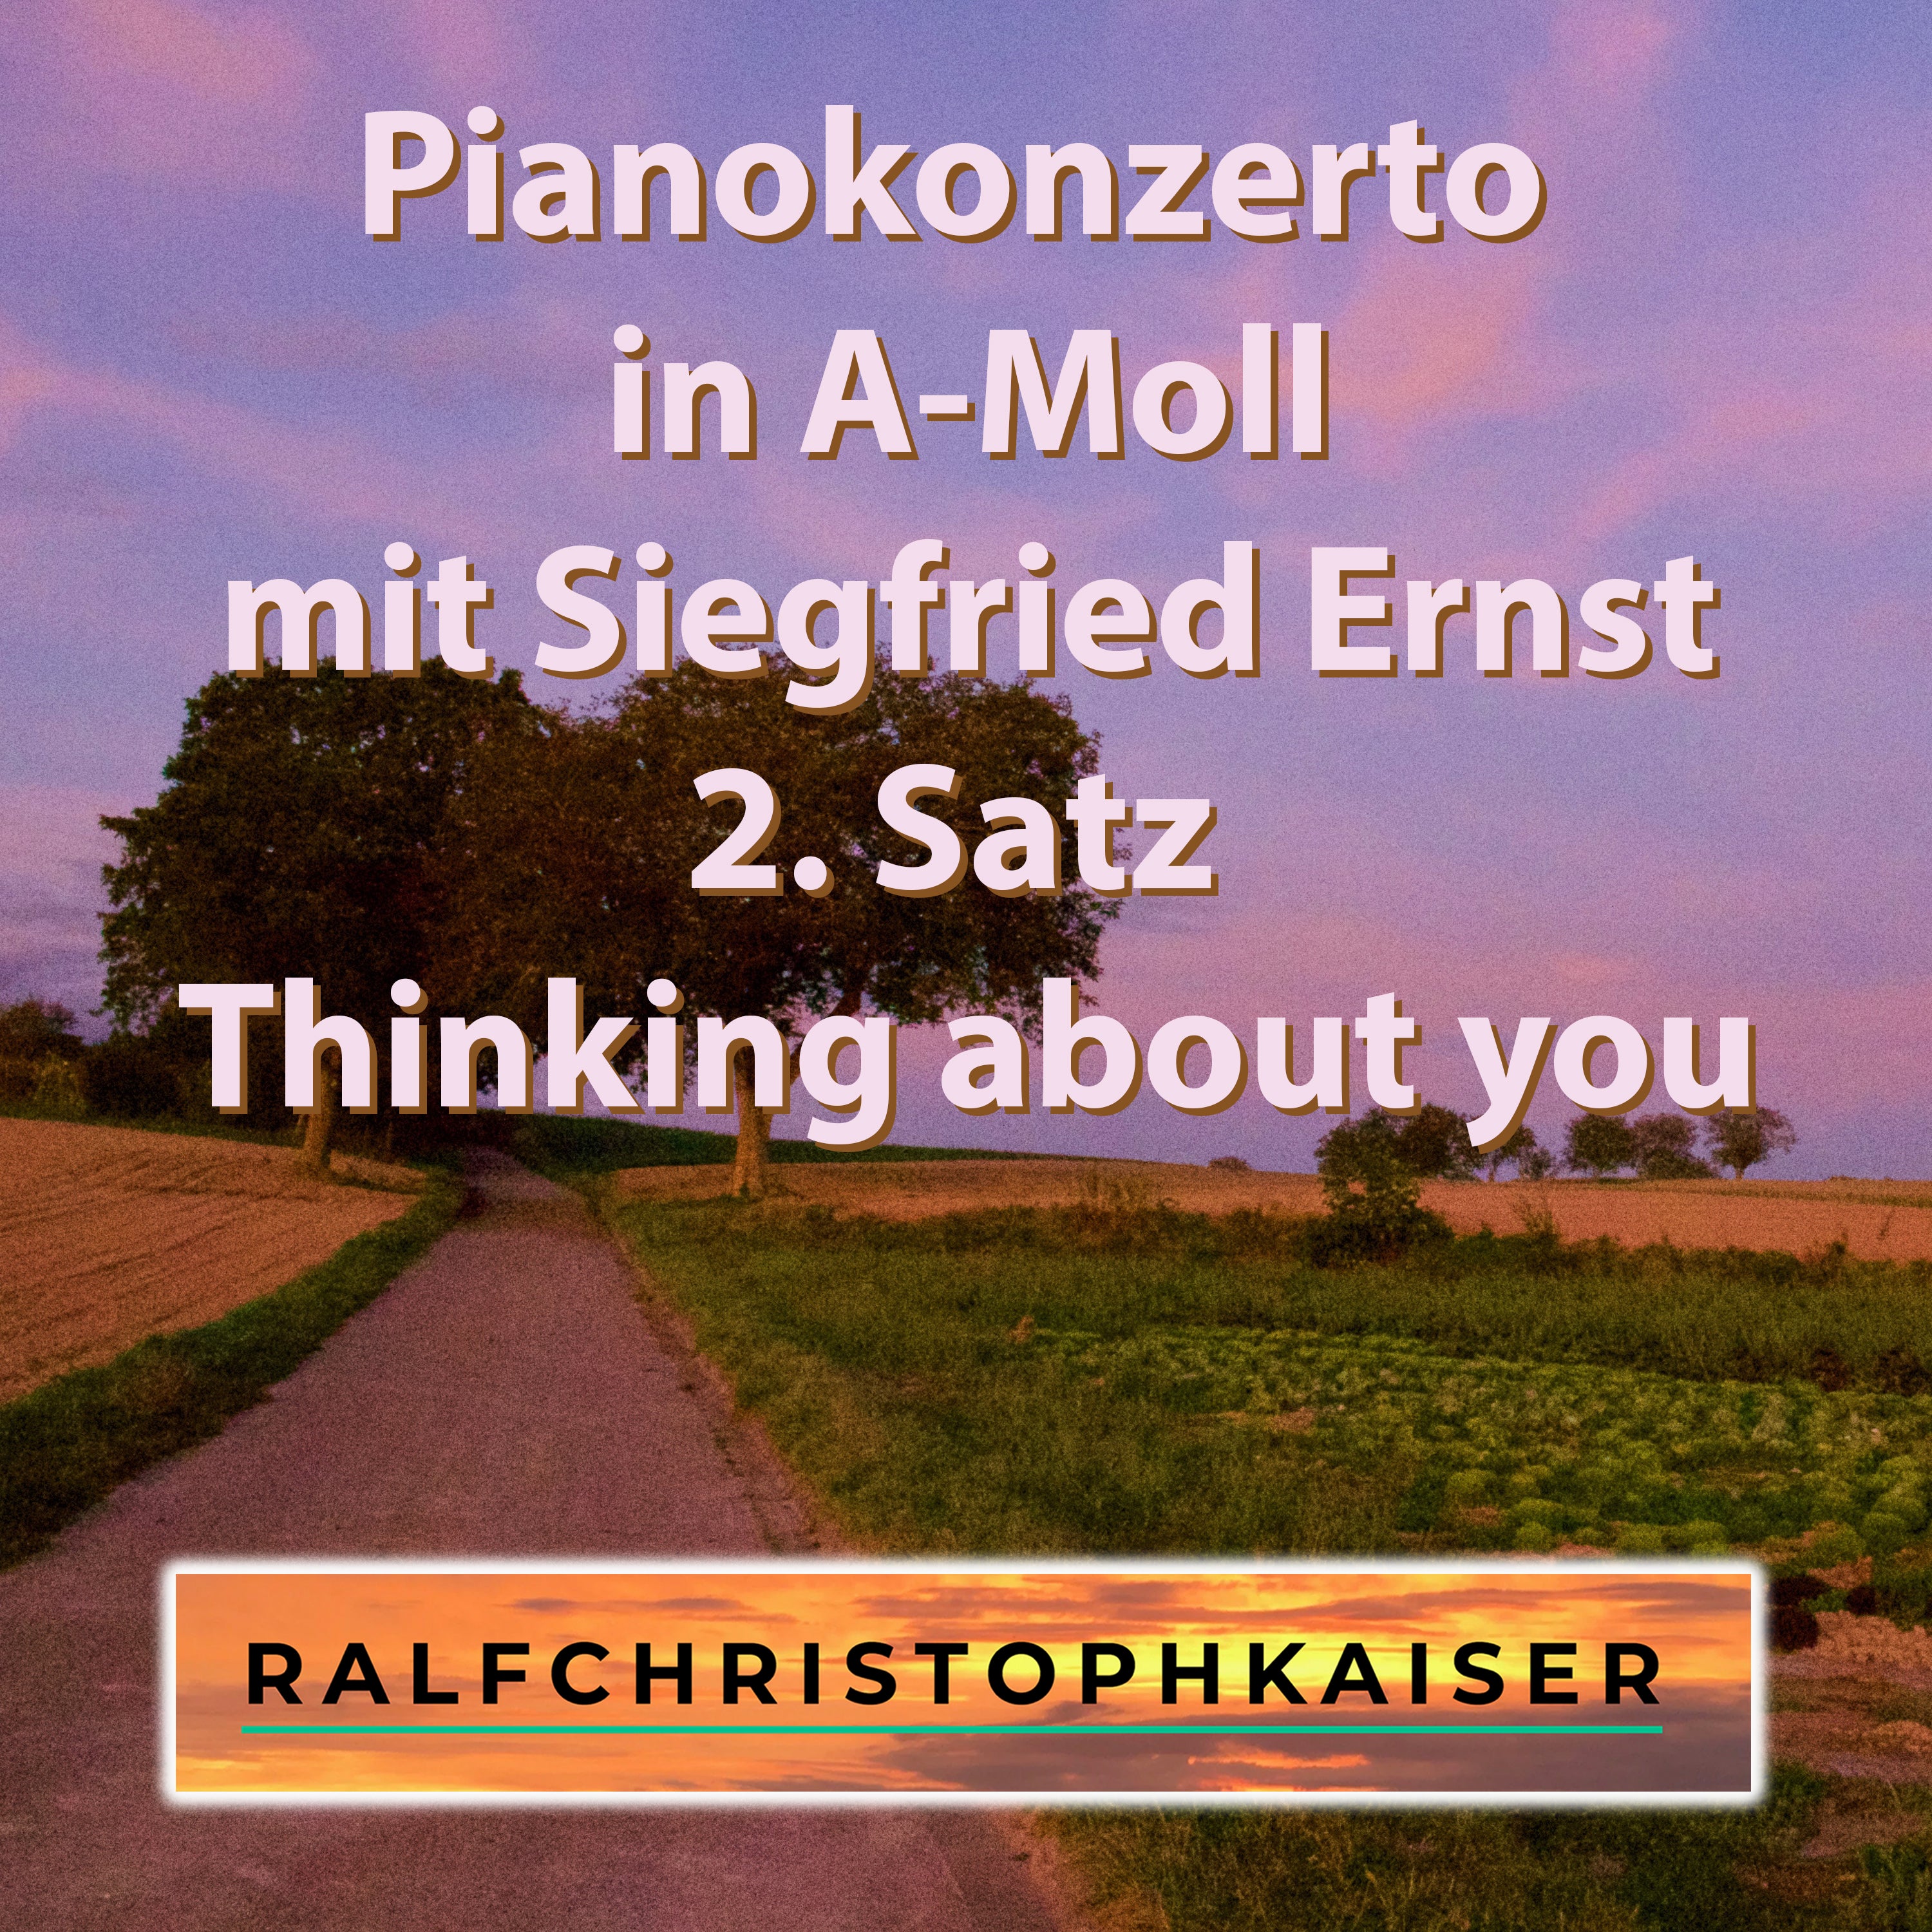 Pianokonzerto in A-minor by Siegfried Ernst and Orchestra by Ralf Christoph Kaiser Part 2 Thinking about you, Full Score Full Orchestra Leadsheet and Parts and Full HD Sound wav File - ralfchristophkaiser.com Musik und Noten